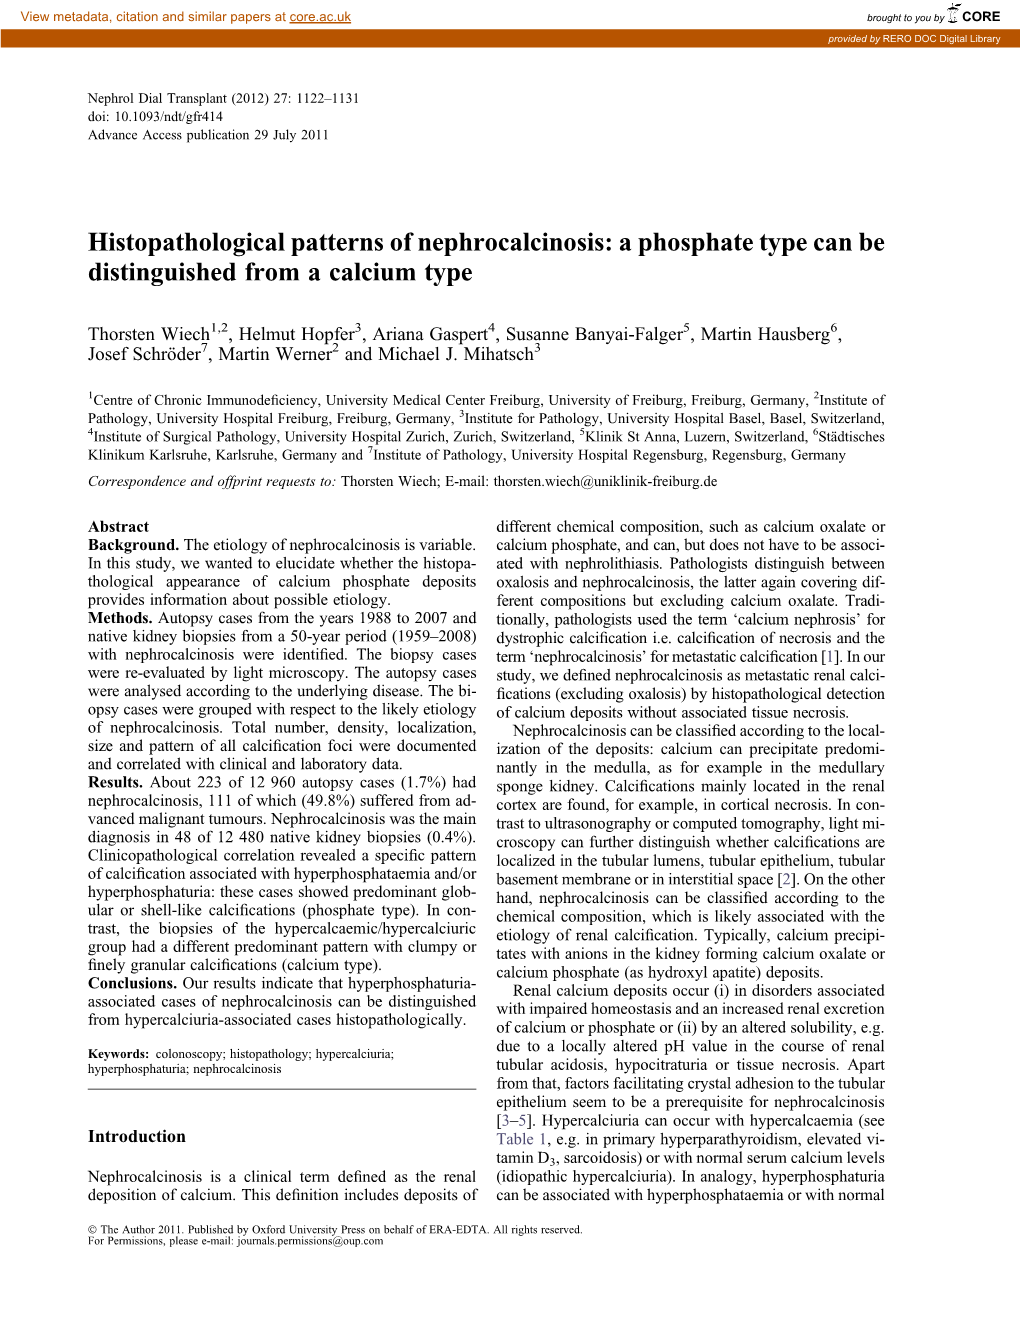 Histopathological Patterns of Nephrocalcinosis: a Phosphate Type Can Be Distinguished from a Calcium Type